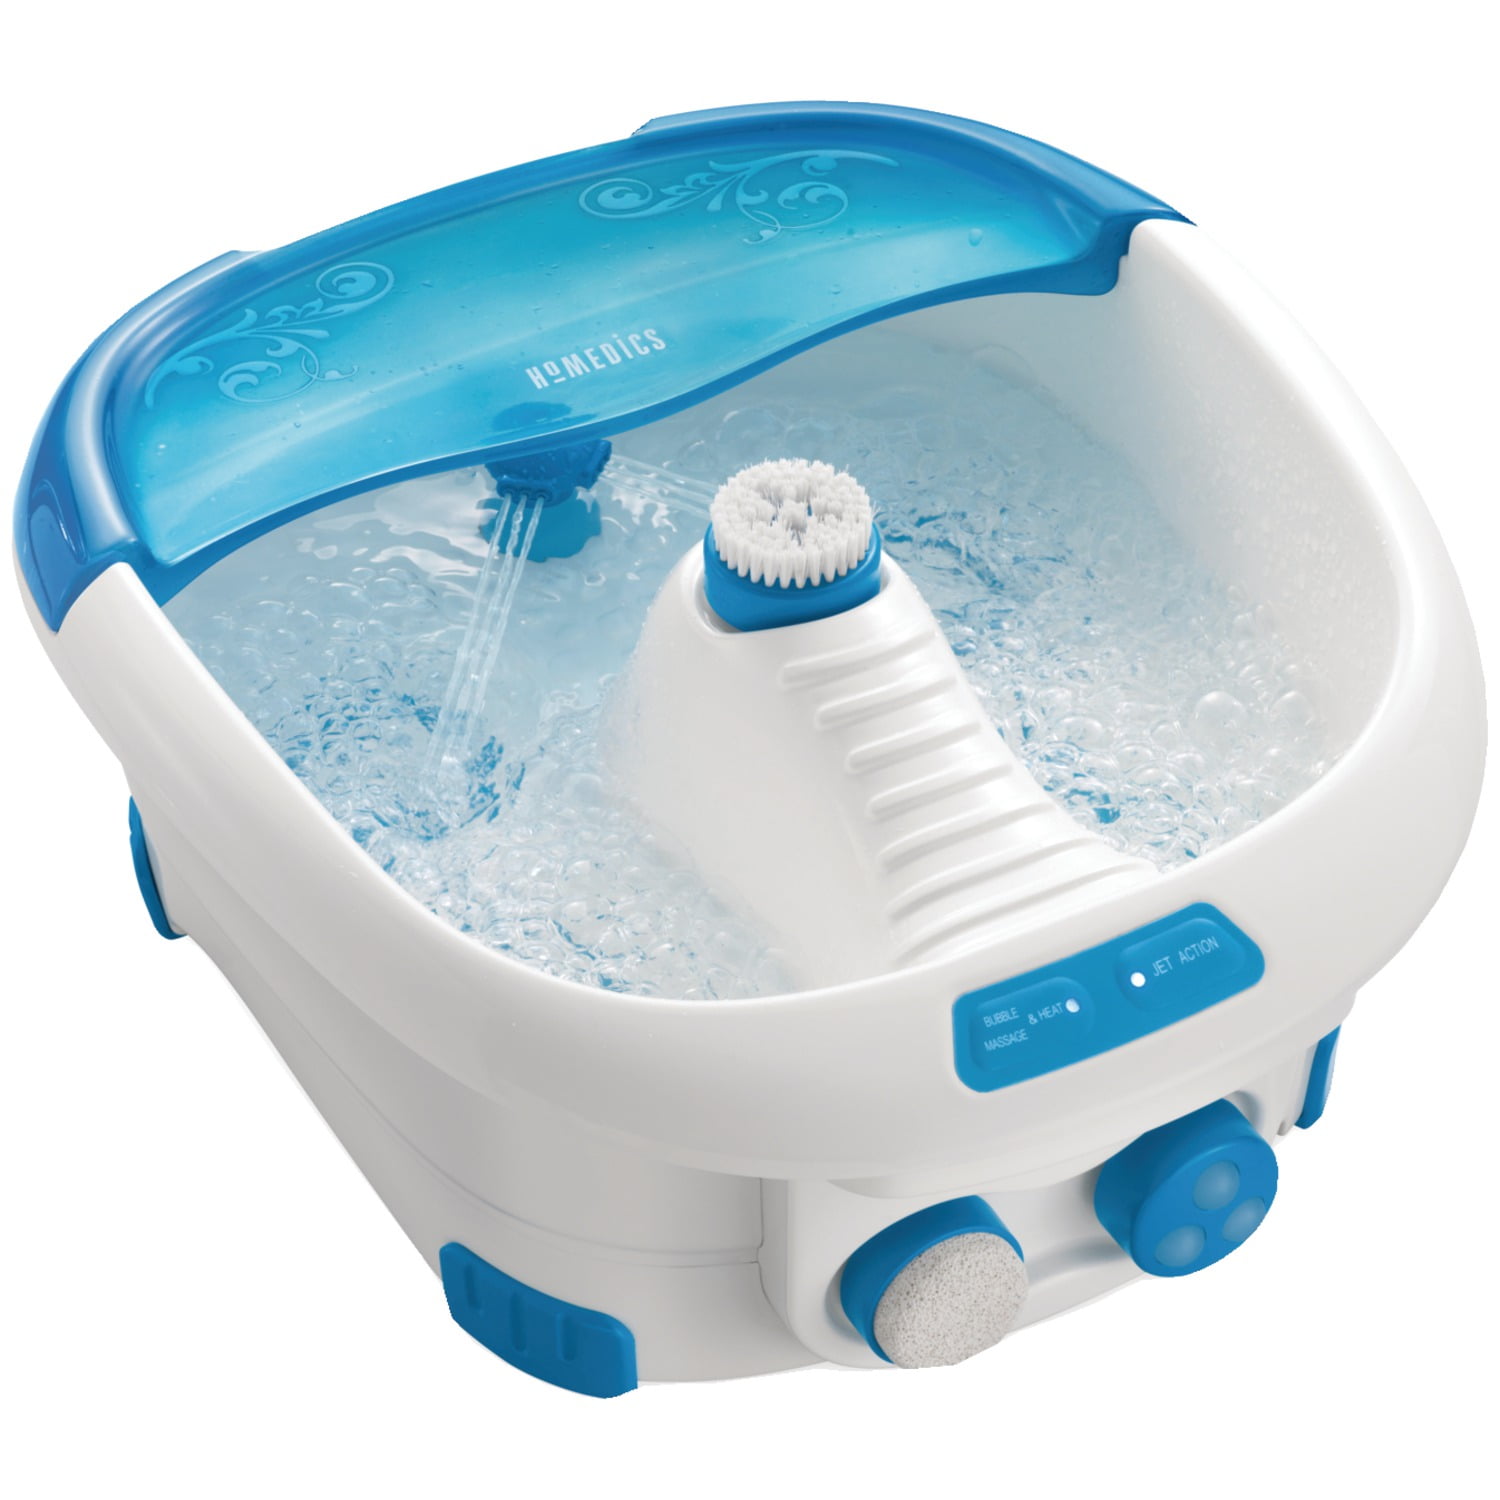 Nursal - Heated Foot Spa Massager - health and beauty - by owner -  household sale - craigslist